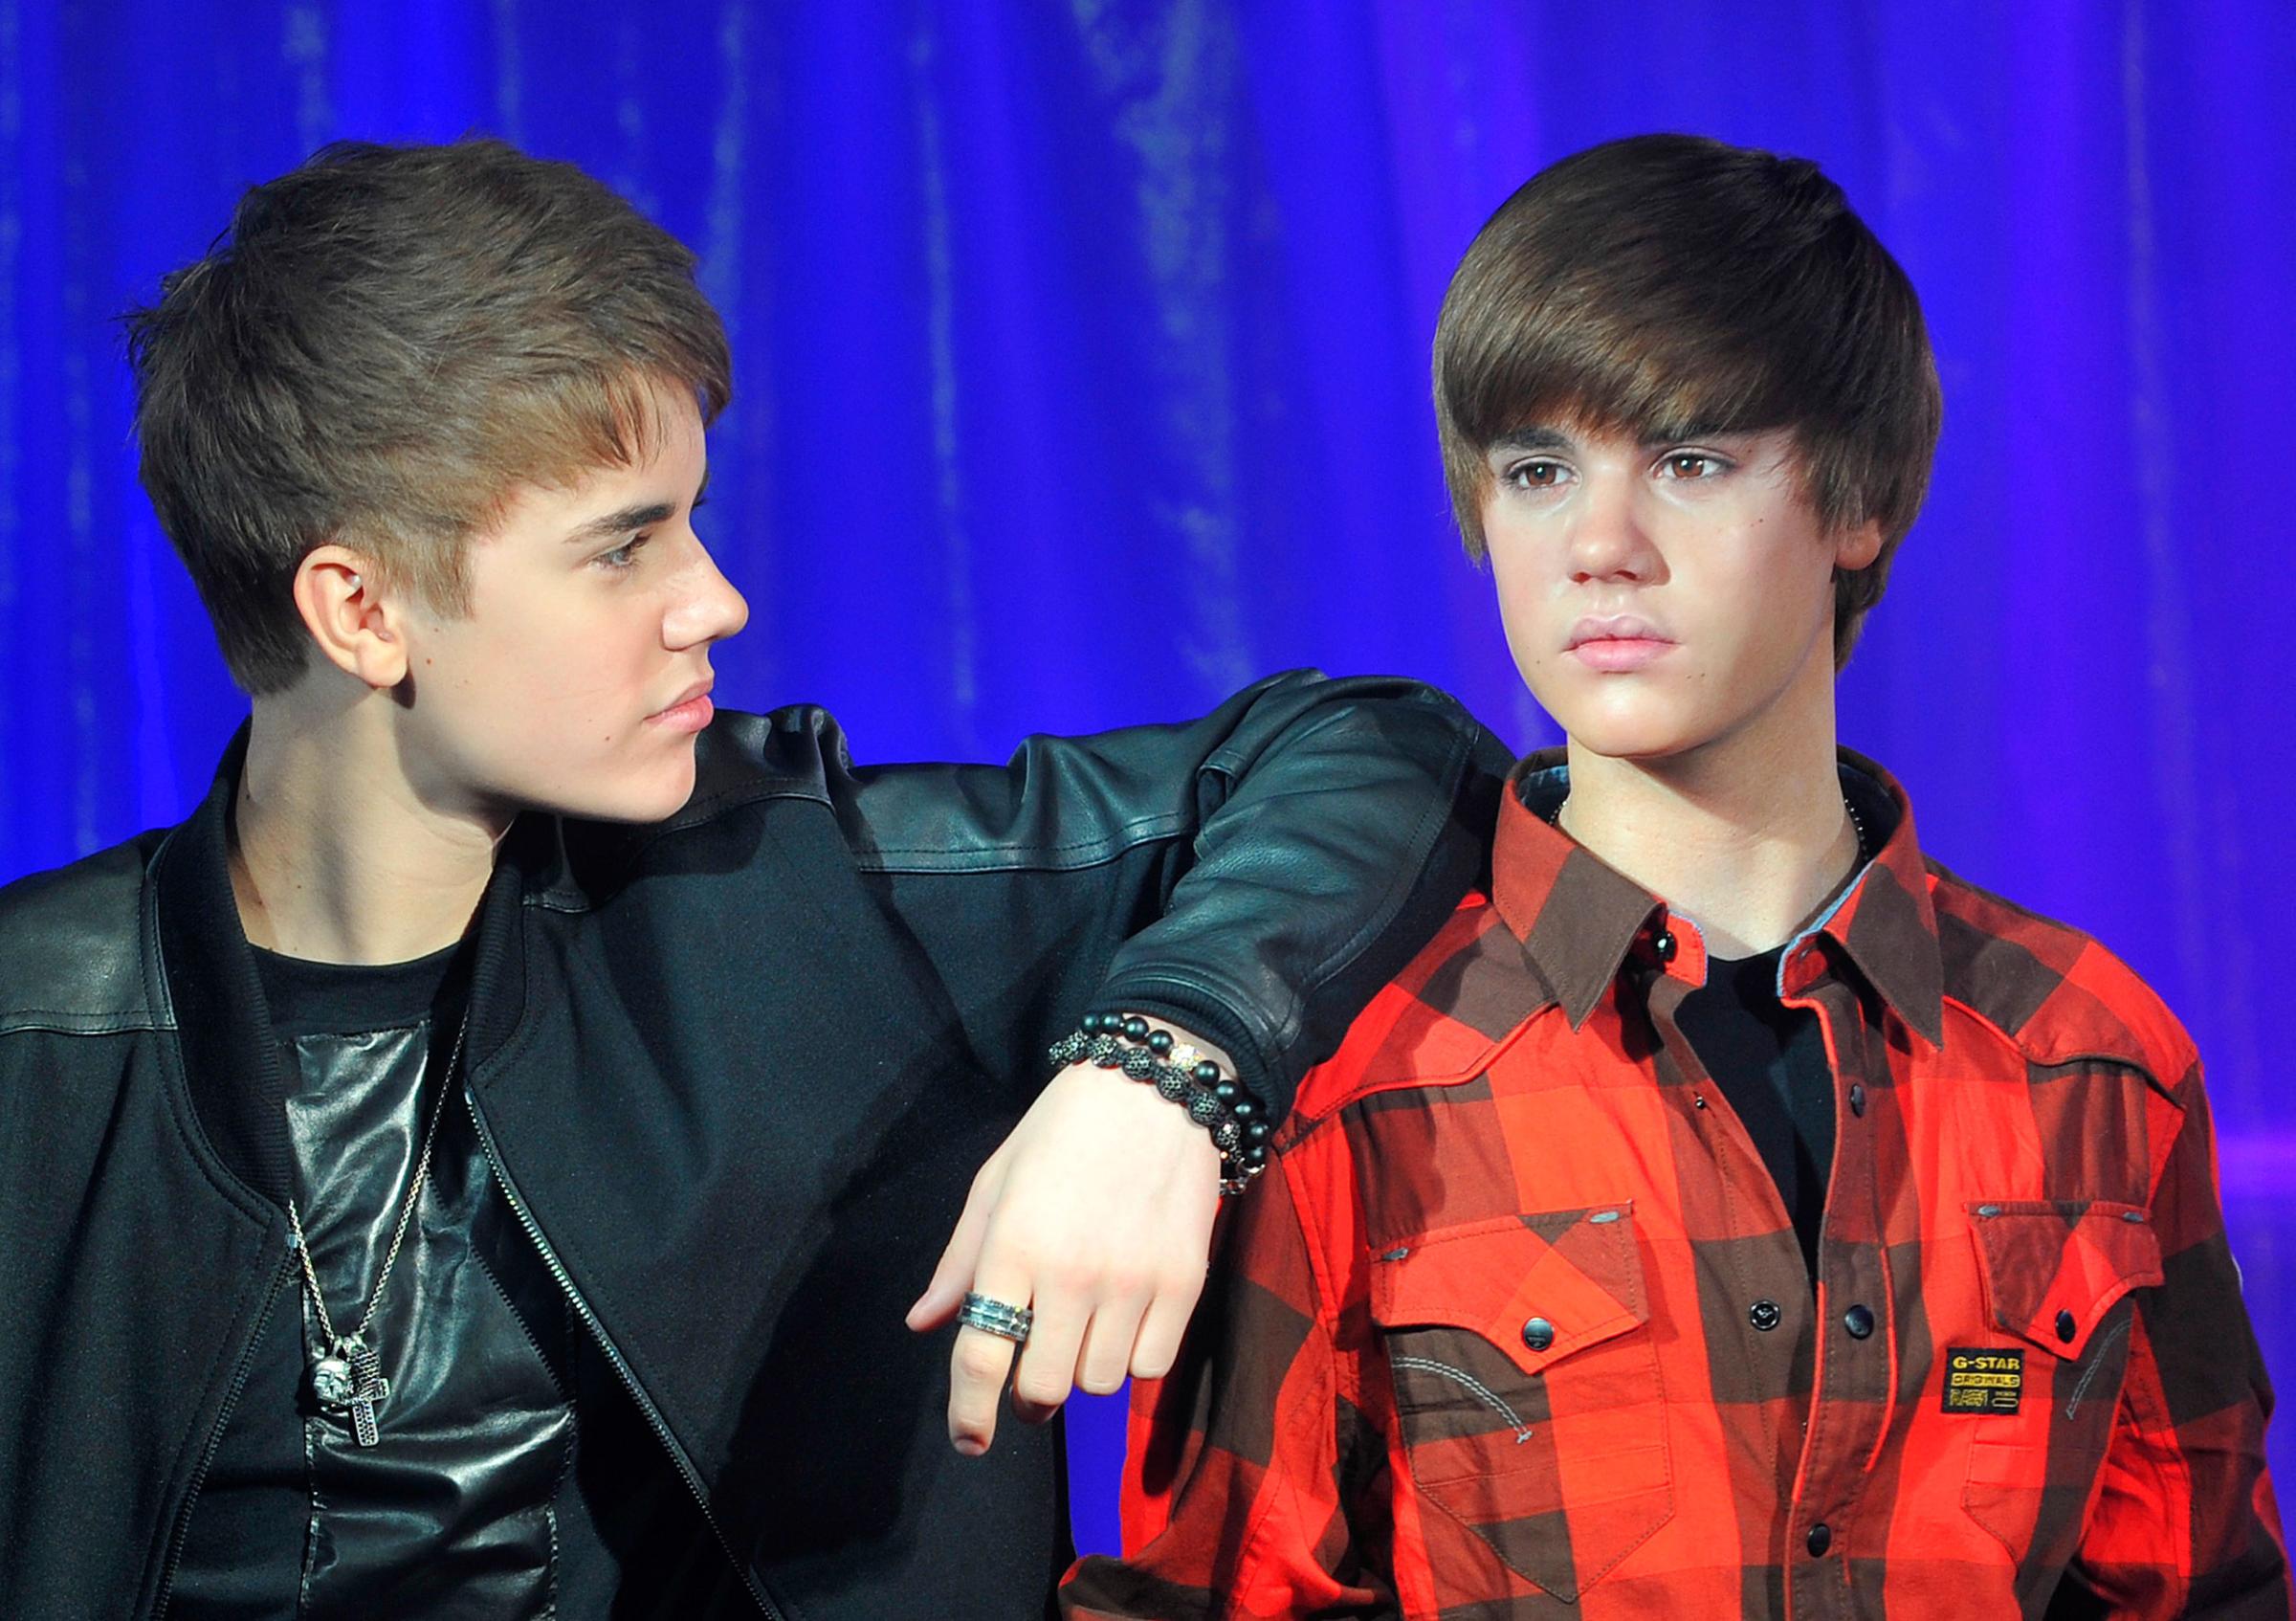 Canadian singer Bieber poses with a waxwork model of himself during an official unveiling at Madame Tussauds wax museum in central London